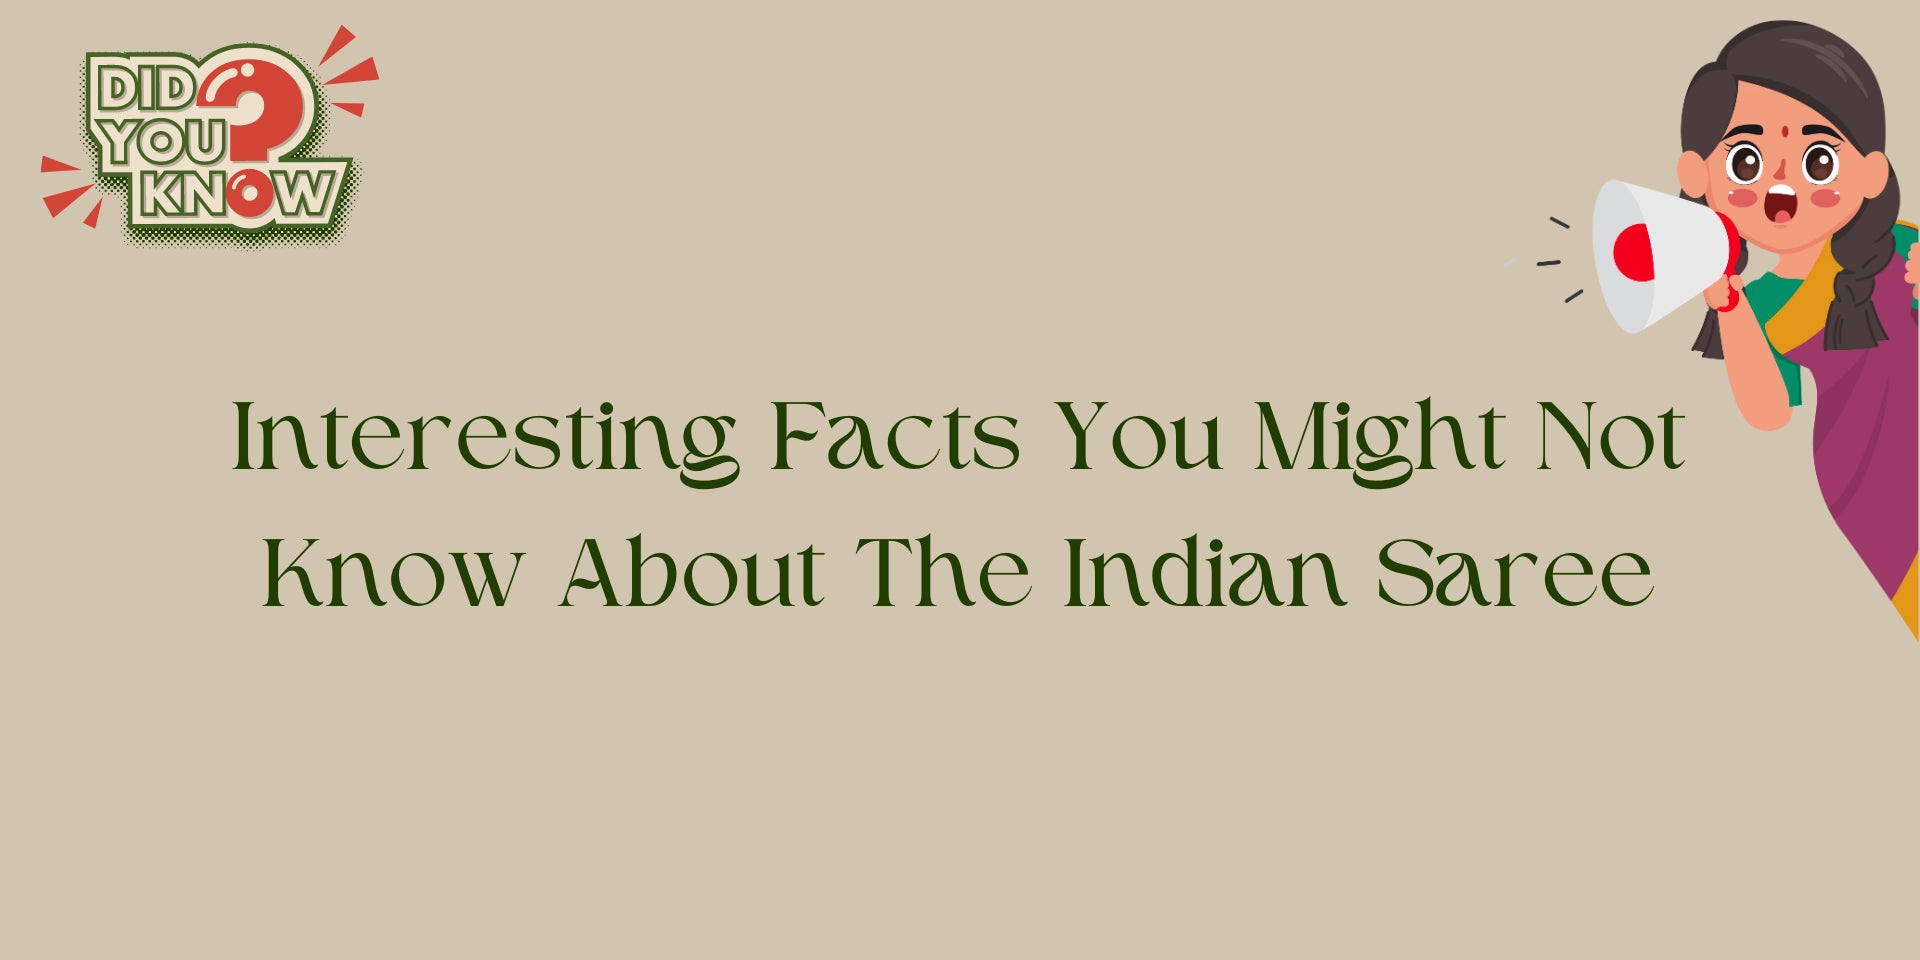 Interesting Facts You Might Not Know About The Indian Saree